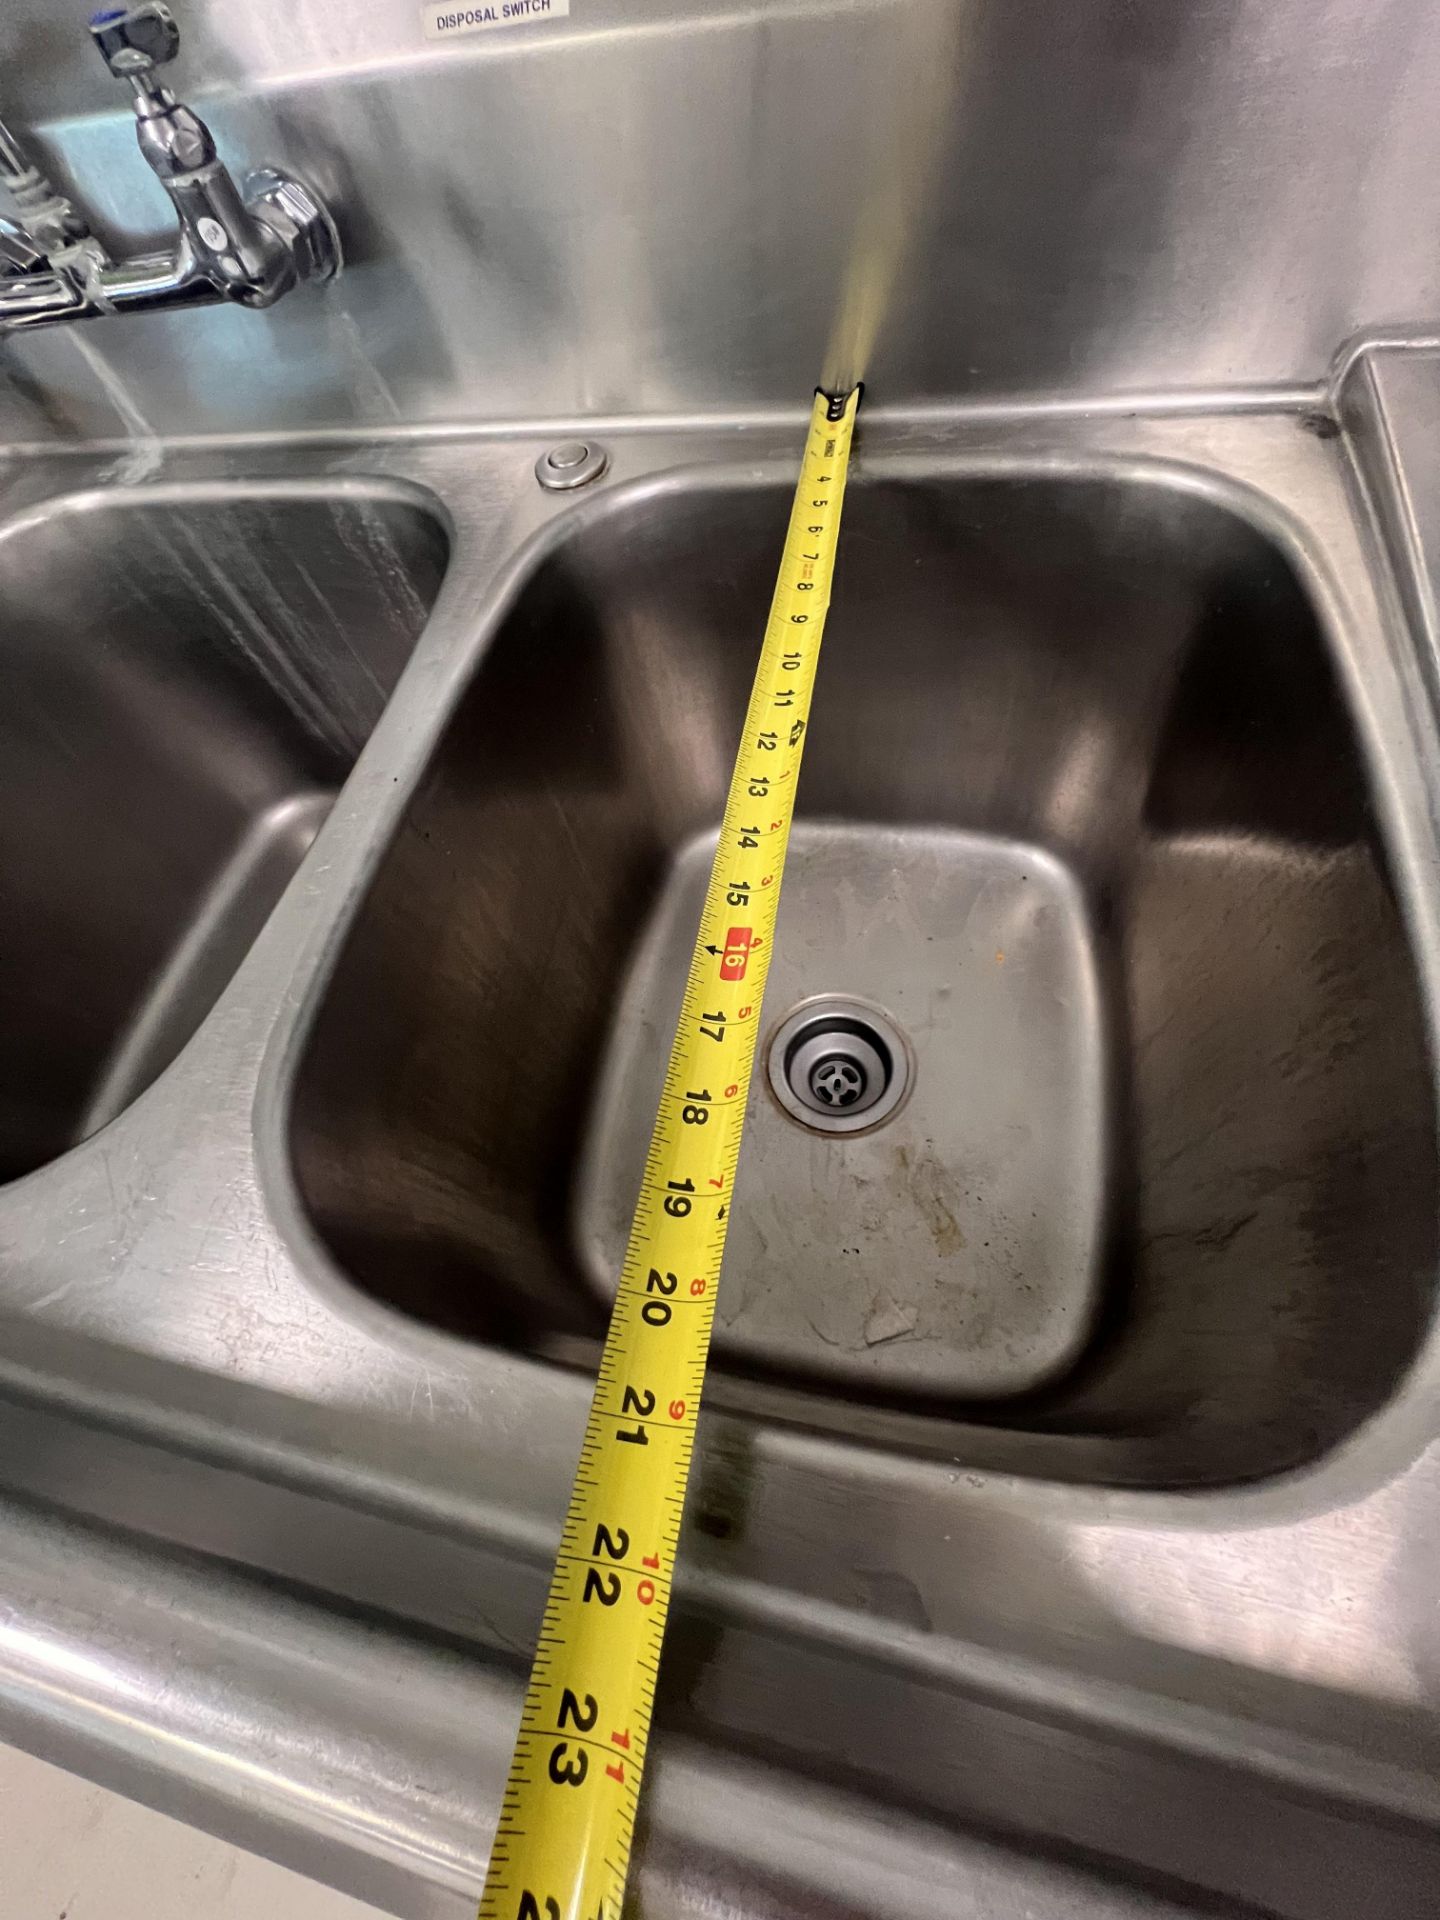 EAGLE GROUP 3-BOWL S/S SINK WITH GARBAGE DISPOSAL, APPROX. 100 IN L X 24 IN W X 39 IN H, - Image 7 of 11